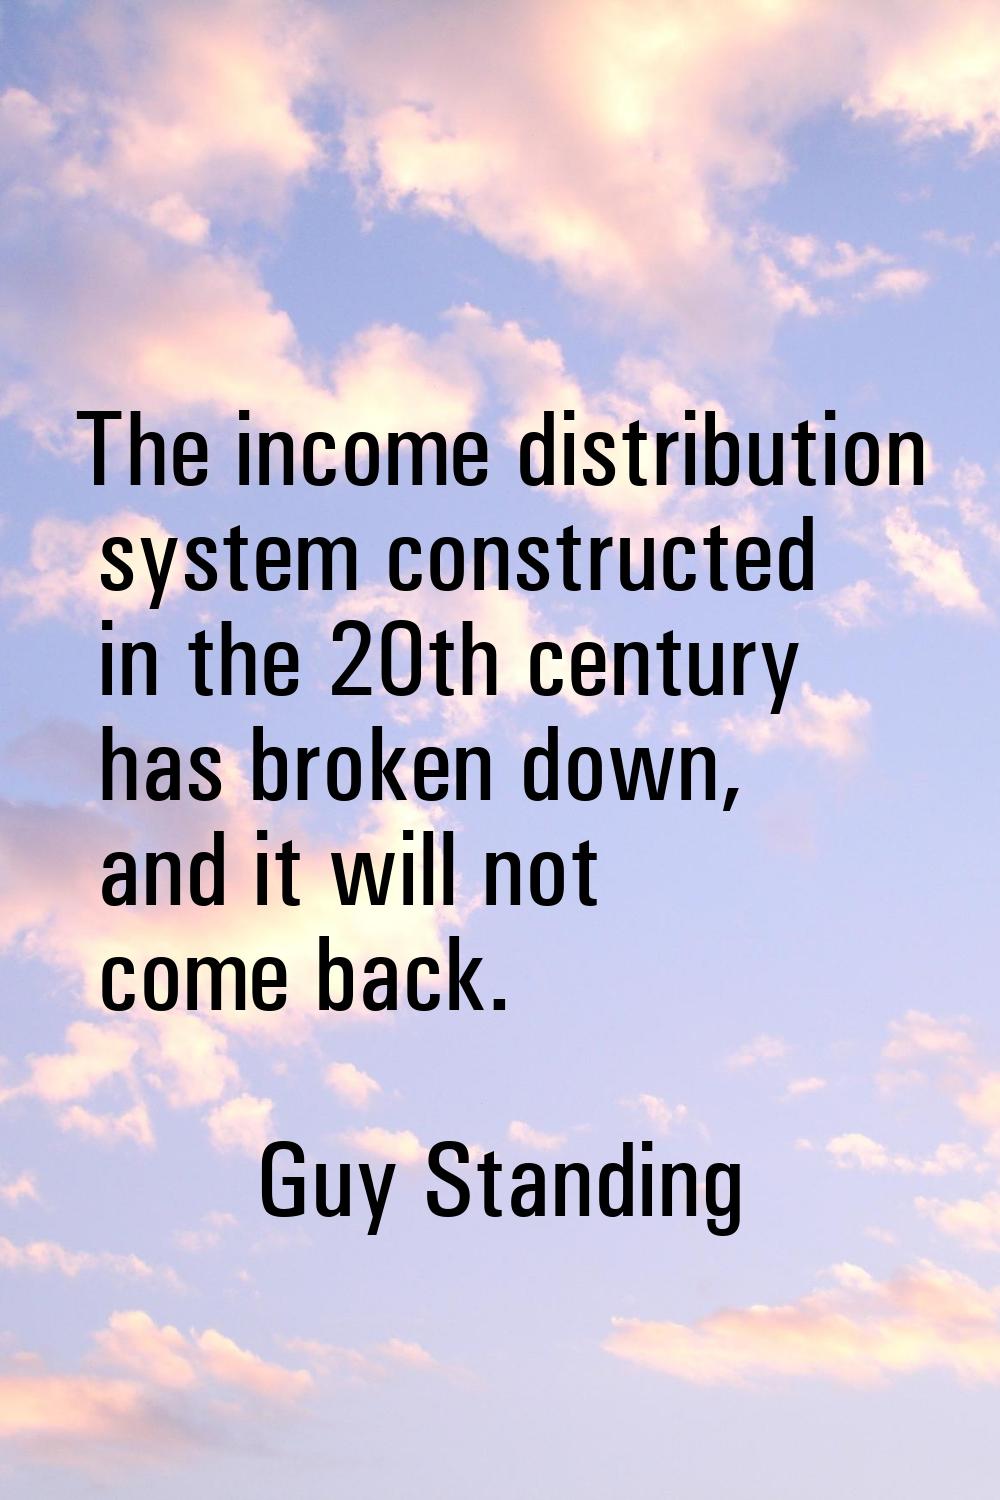 The income distribution system constructed in the 20th century has broken down, and it will not com